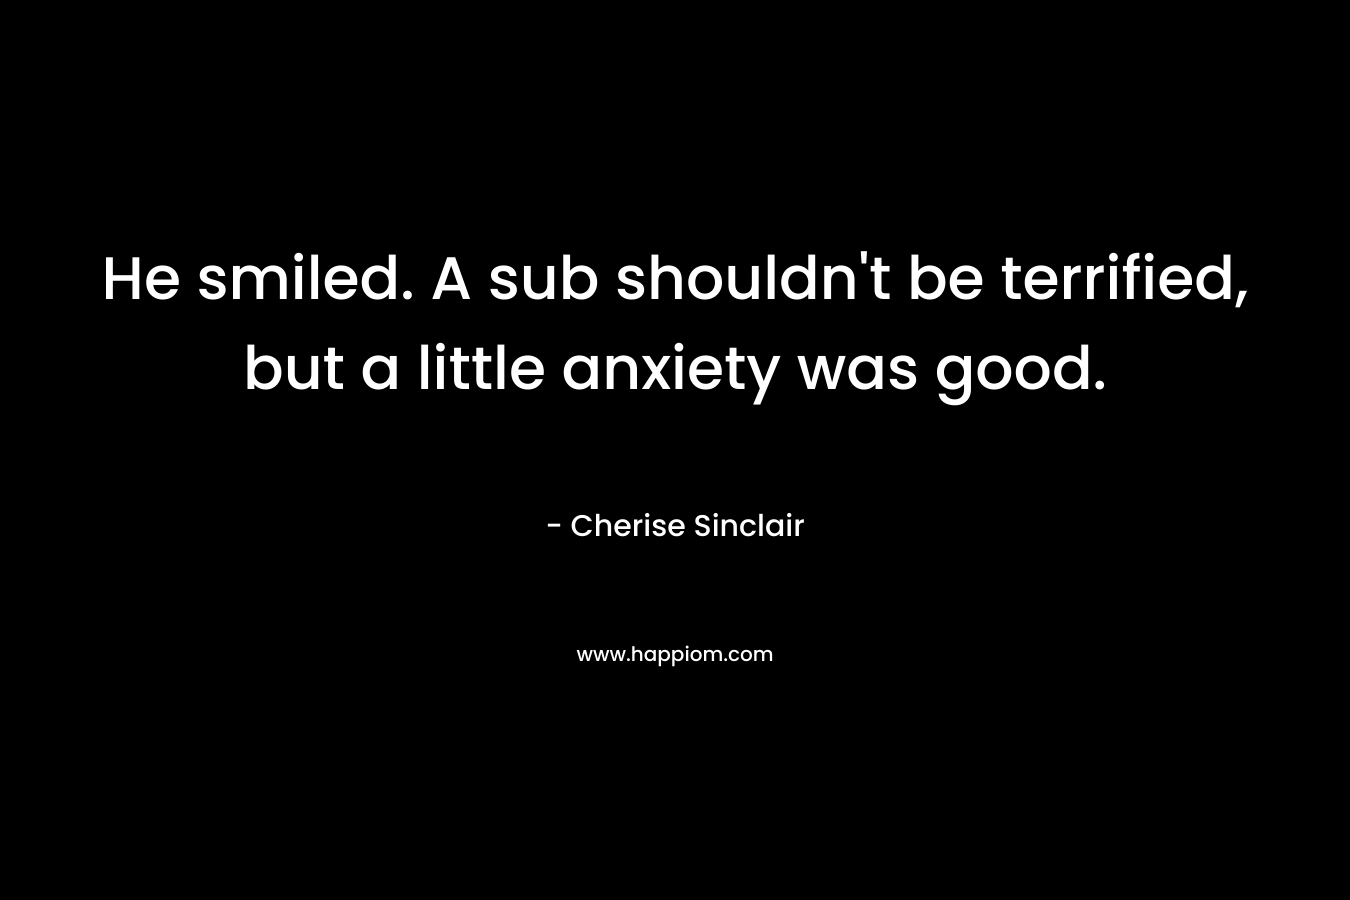 He smiled. A sub shouldn’t be terrified, but a little anxiety was good. – Cherise Sinclair